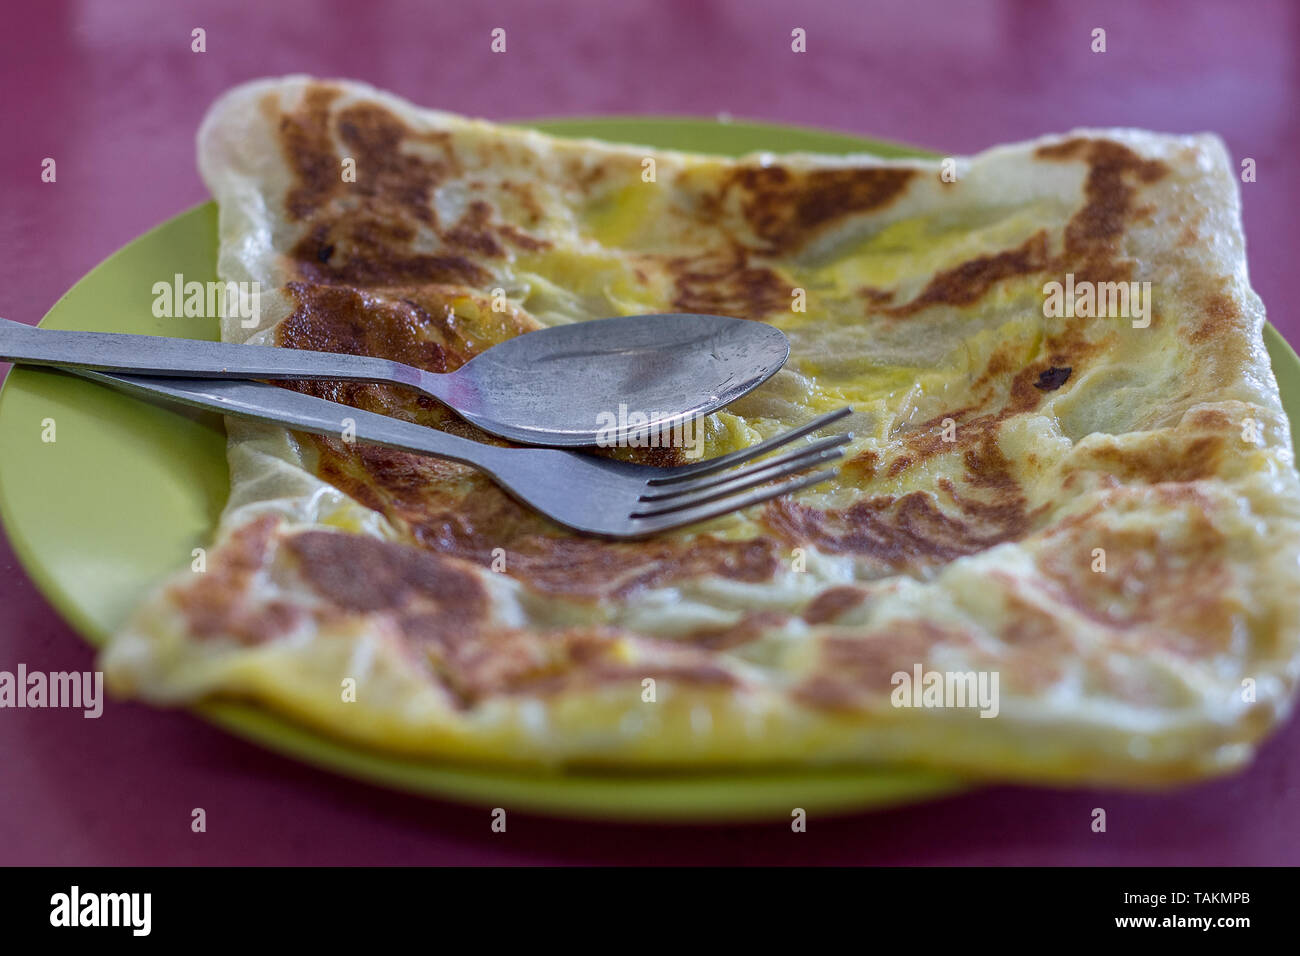 Basic asian pancake severed on a green plate with spoon and fork. Stock Photo